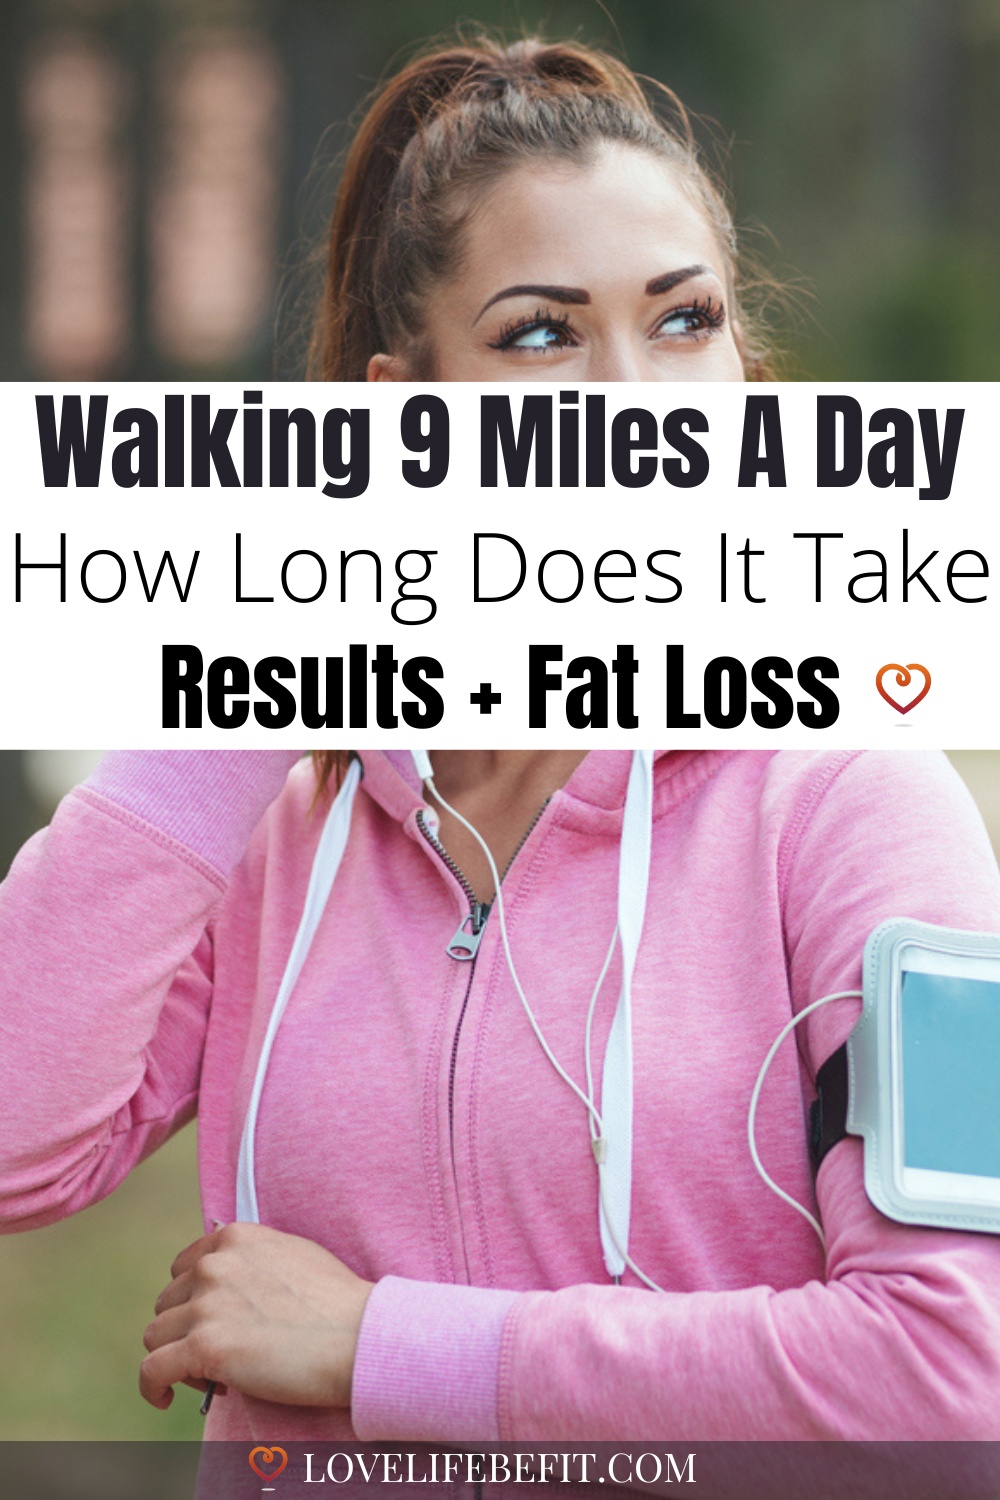 walking 9 miles a day for weight loss - how long does it take to walk 9 miles?